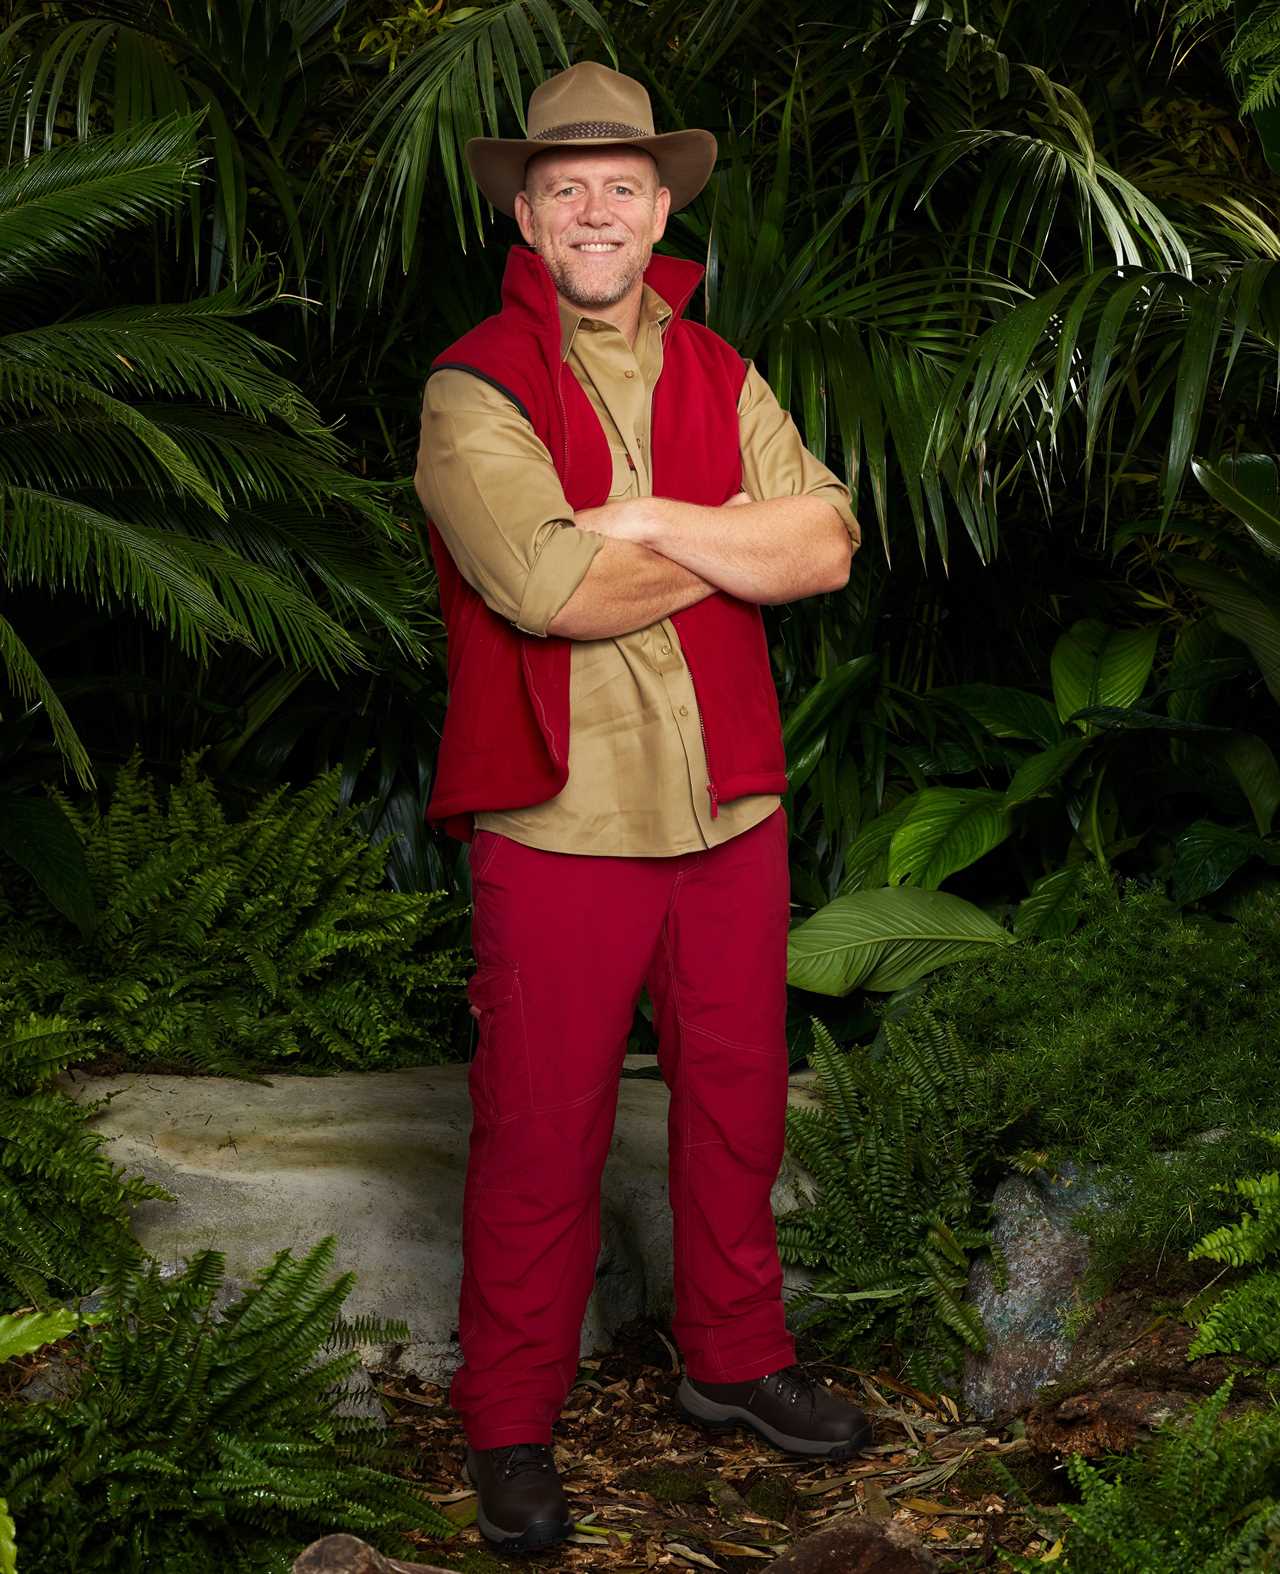 Mike Tindall is competing in I’m A Celeb for cash after work dried up in lockdown, claims pal